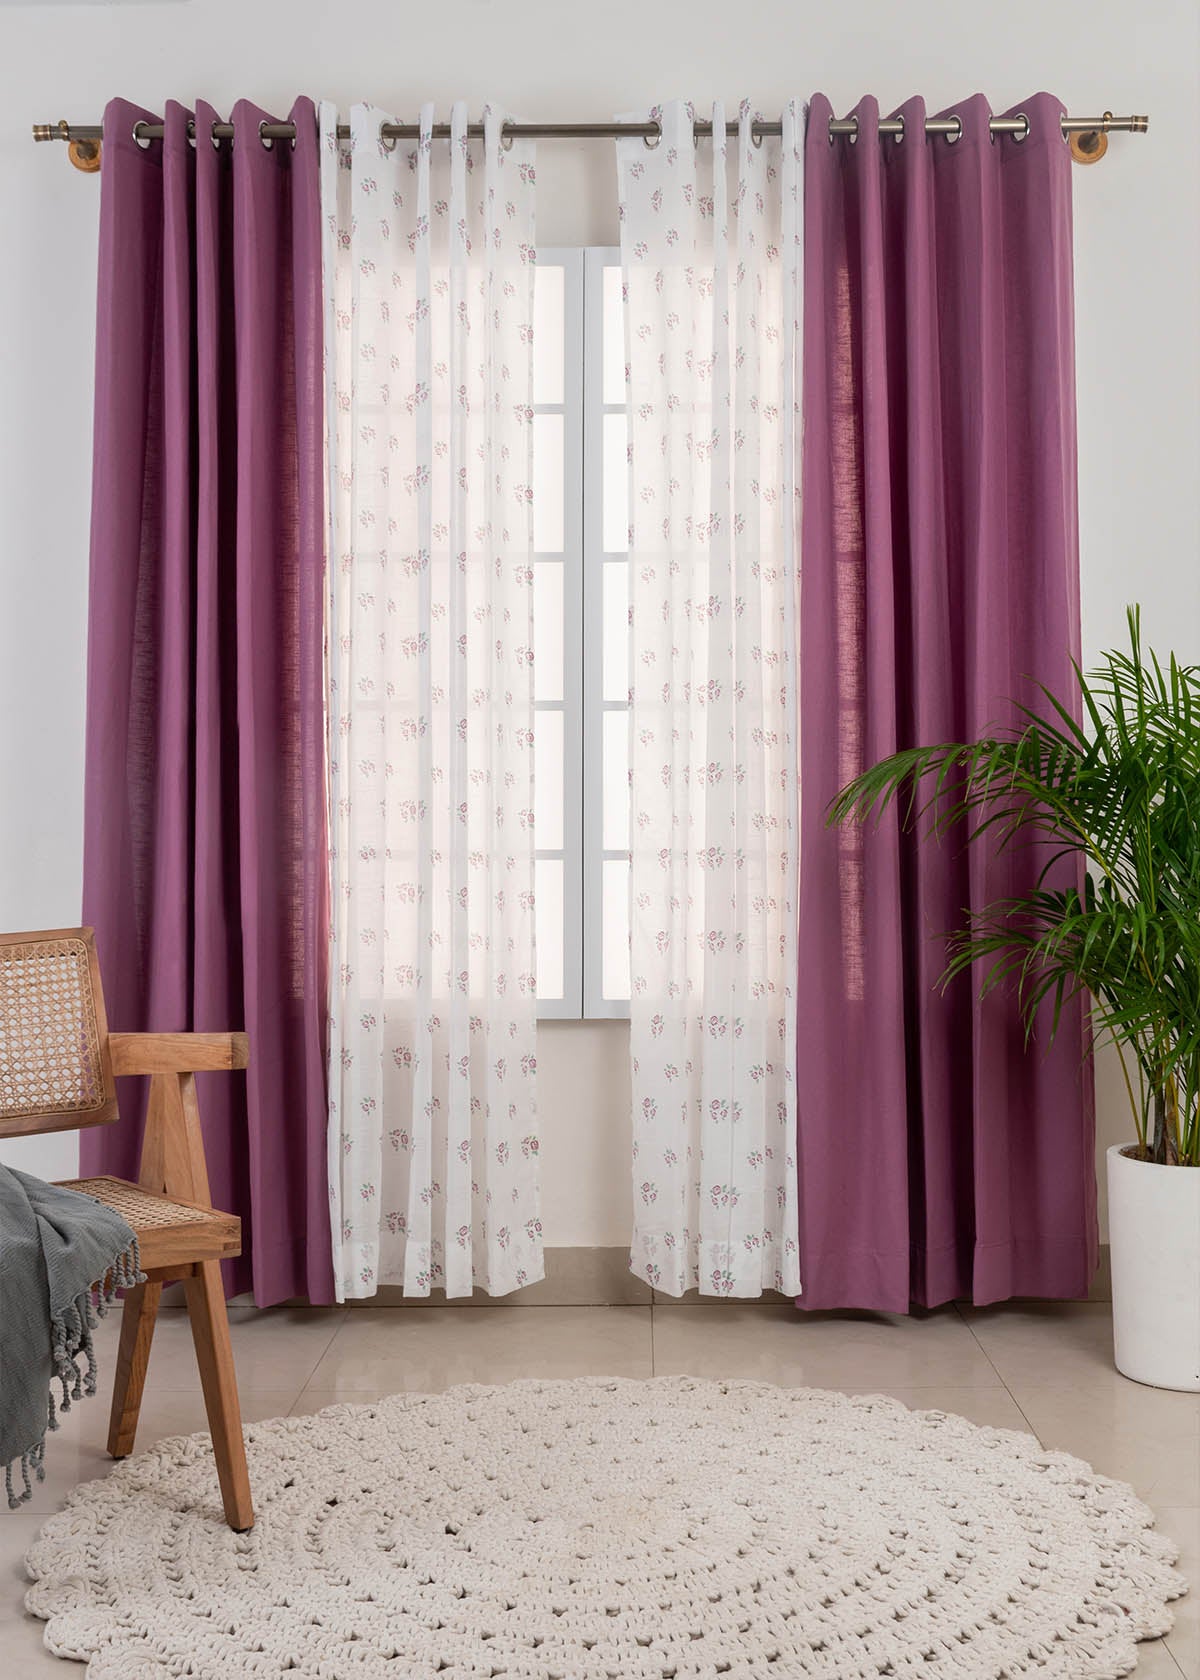 Grape Solid, Rose Garden Sheer Set of 4 Combo Cotton Curtain - Lavender